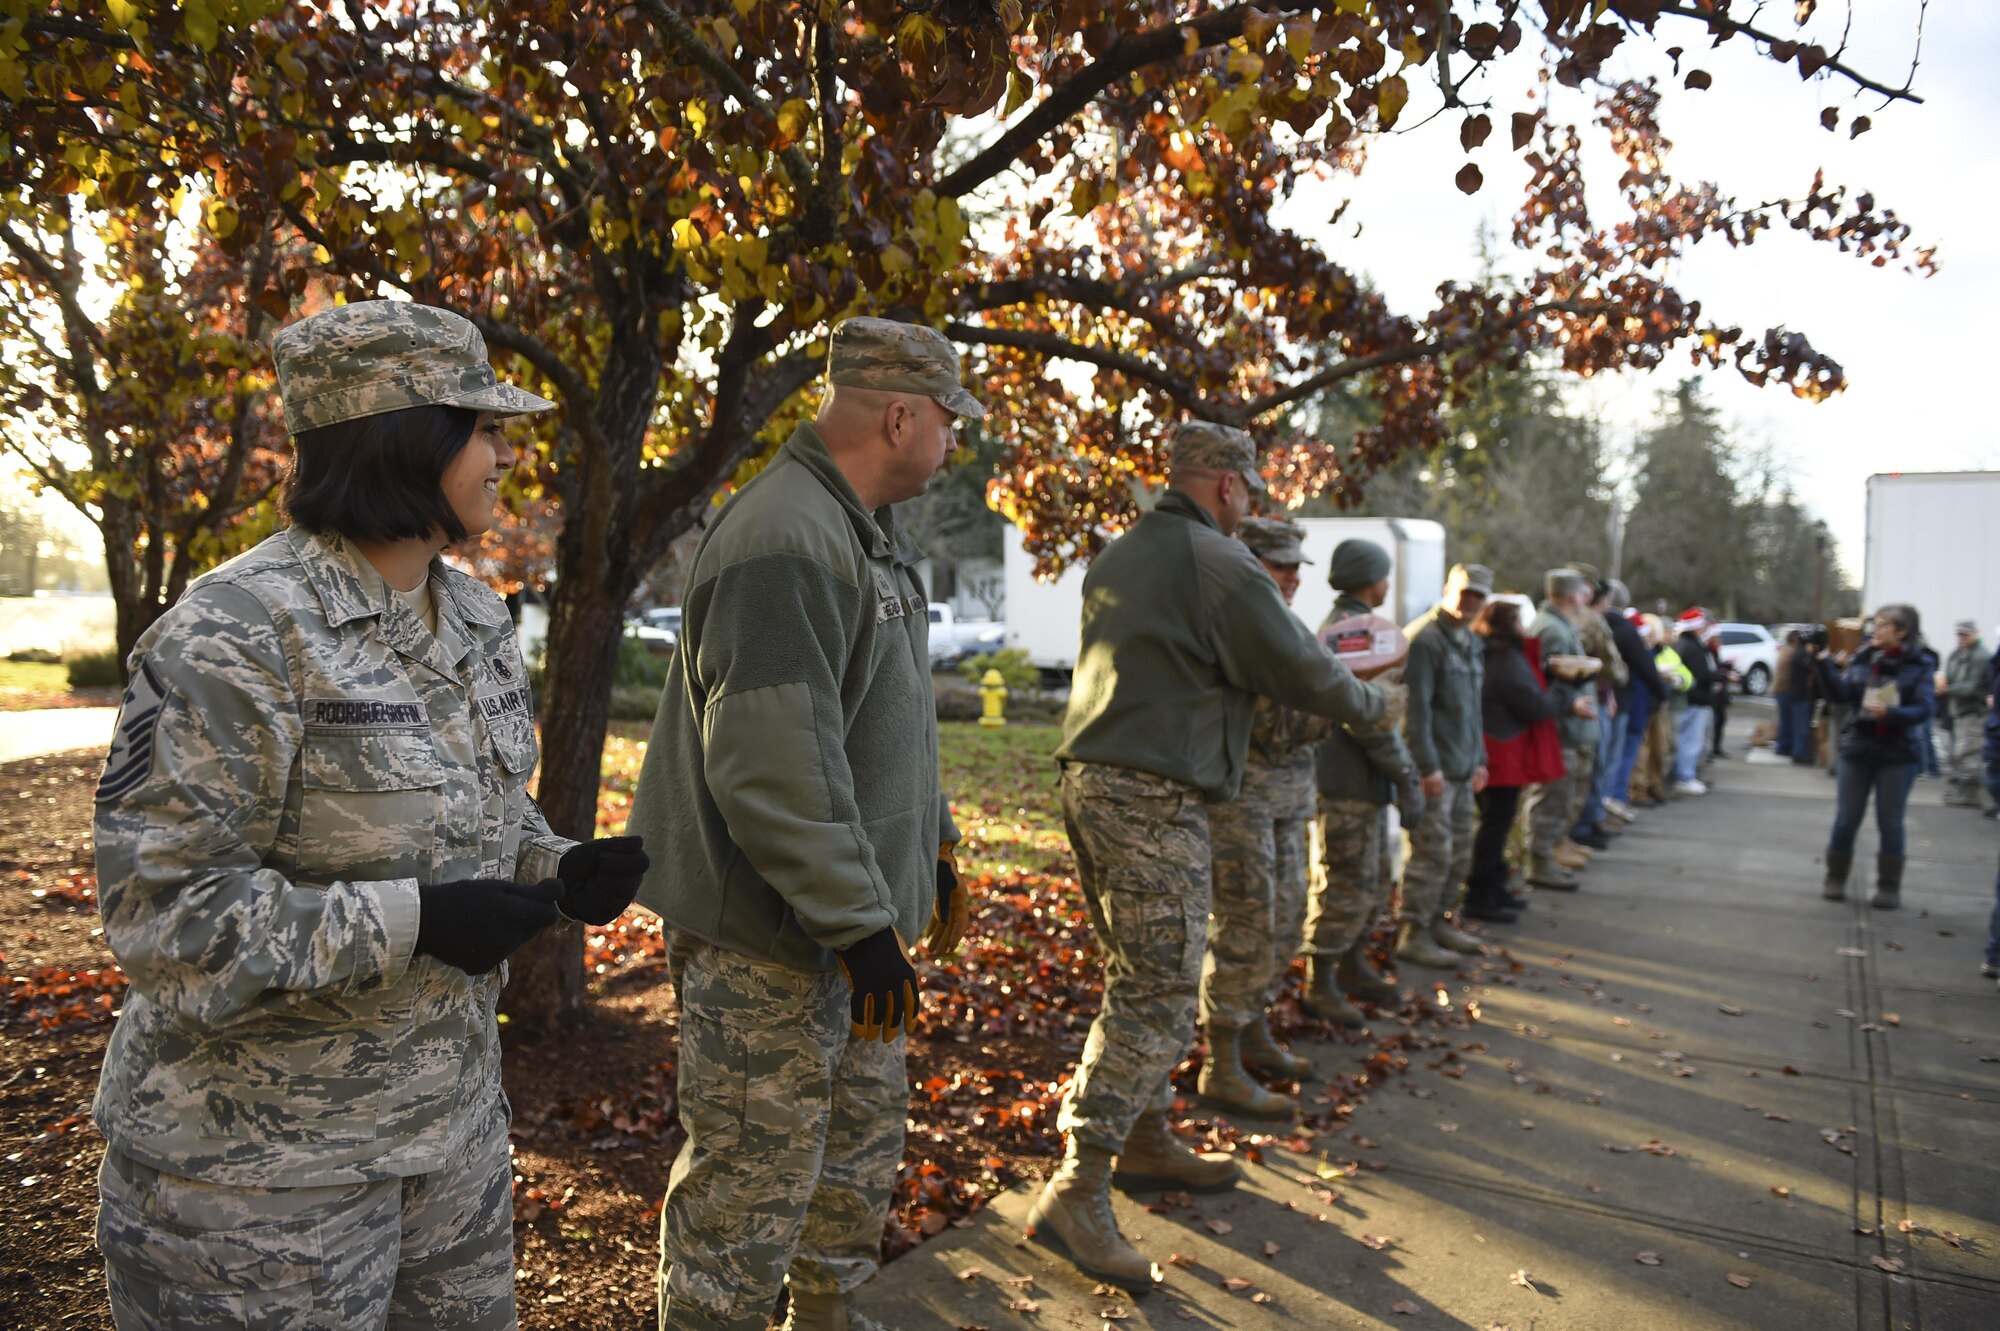 Members of the 62nd Airlift Wing participate in Operation Ham Grenade on Joint Base Lewis-McChord, Wash. Dec. 16, 2016. More than 500 hams were distributed to Airmen and Soldiers at JBLM in total for the December holidays. (U.S. Air Force photo/Staff Sgt. Naomi Shipley)